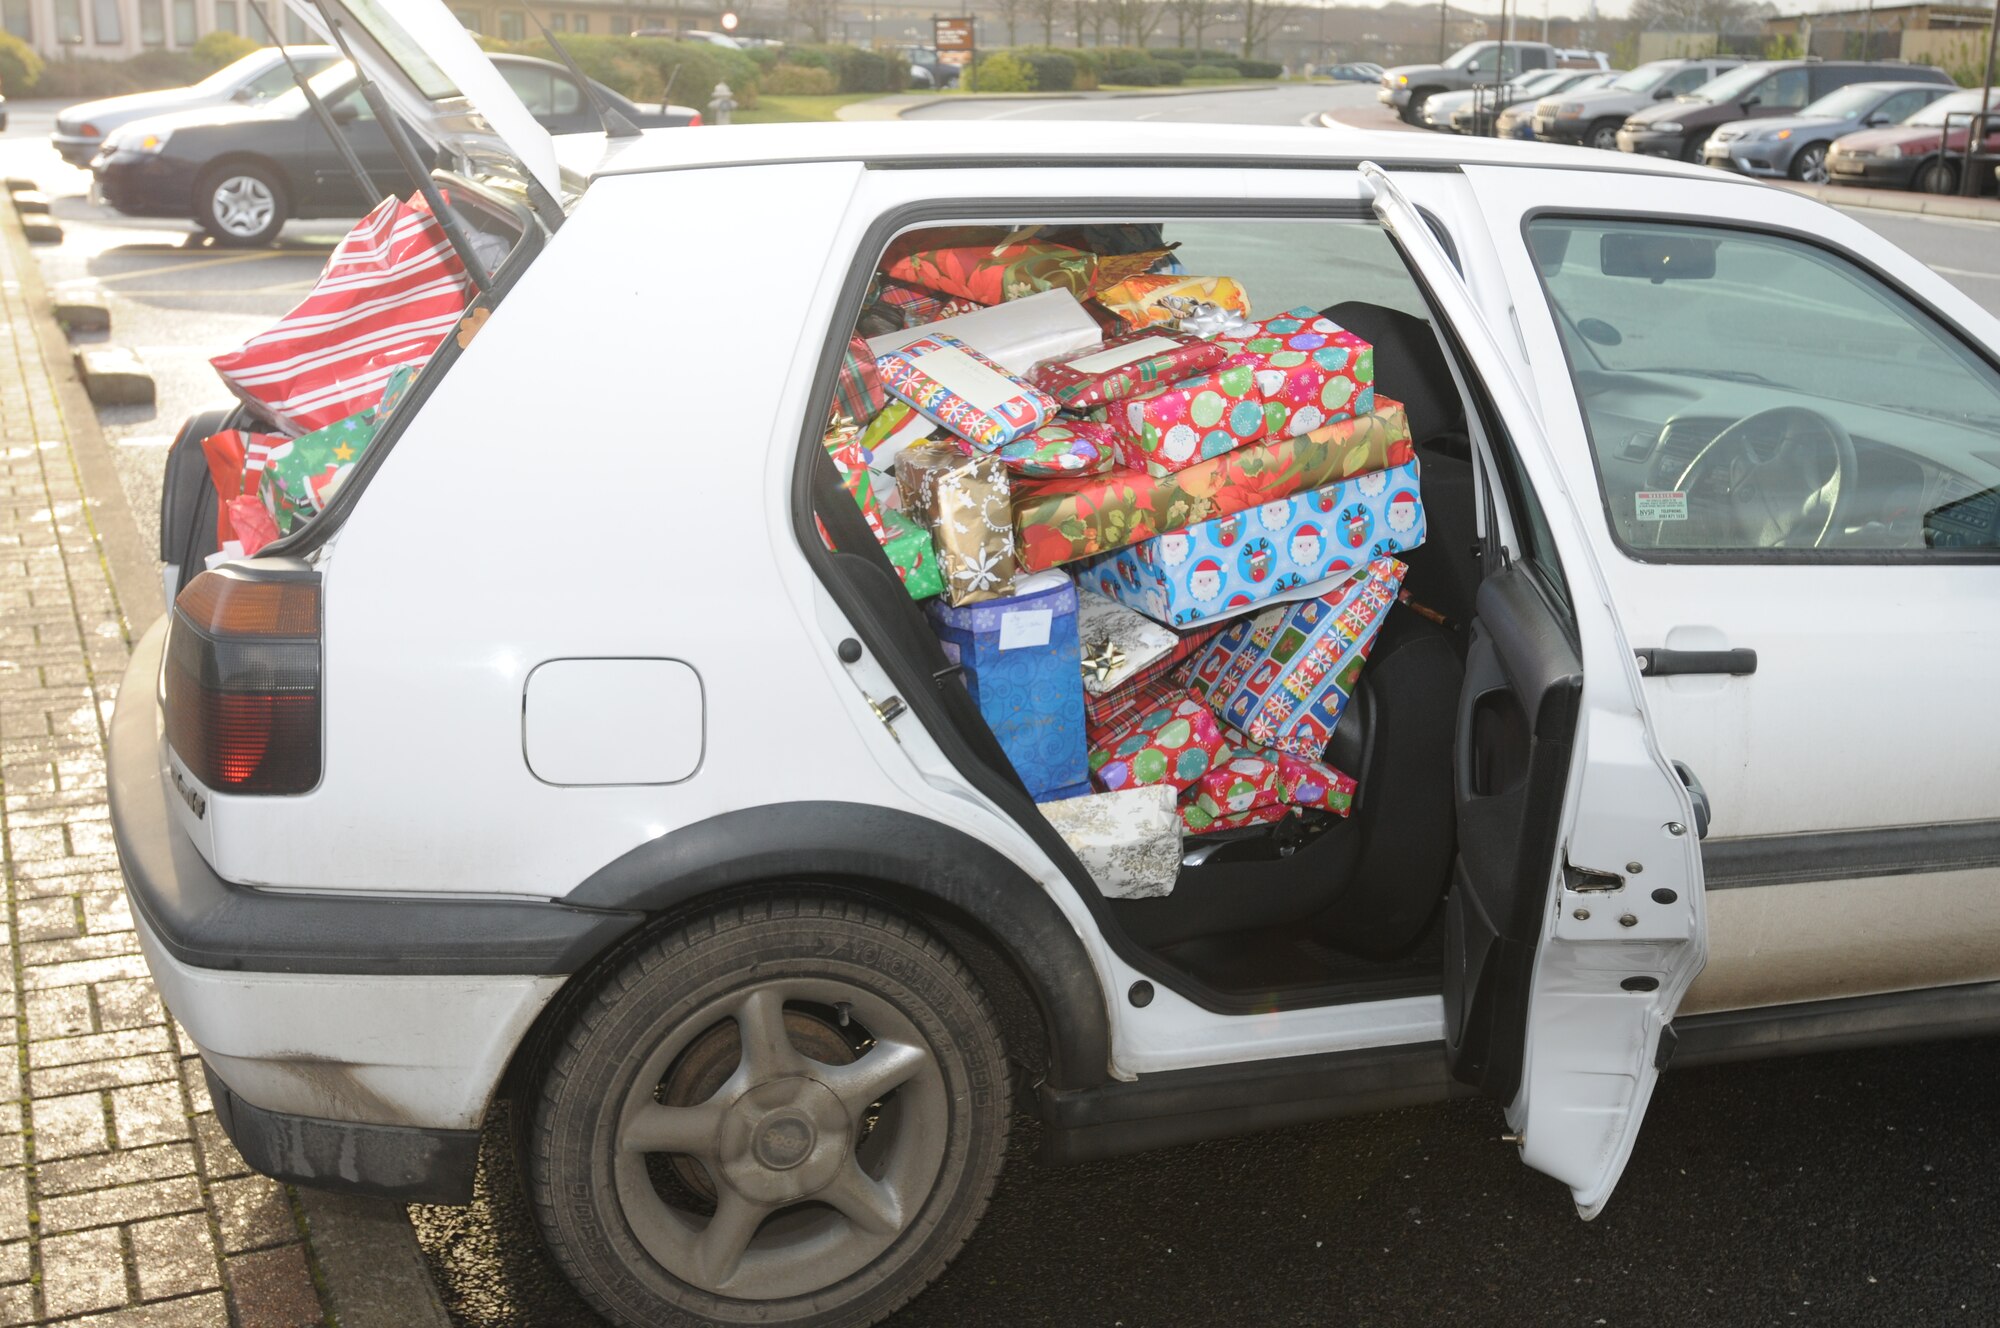 A car full of presents for the Sure Start Children’s Centre is ready to leave for Thetford. The Christmas presents were collected over a ten-day period and delivered to the children’s centre Dec. 18. (U.S. Air Force photo by Senior Airman Kristopher Levasseur)